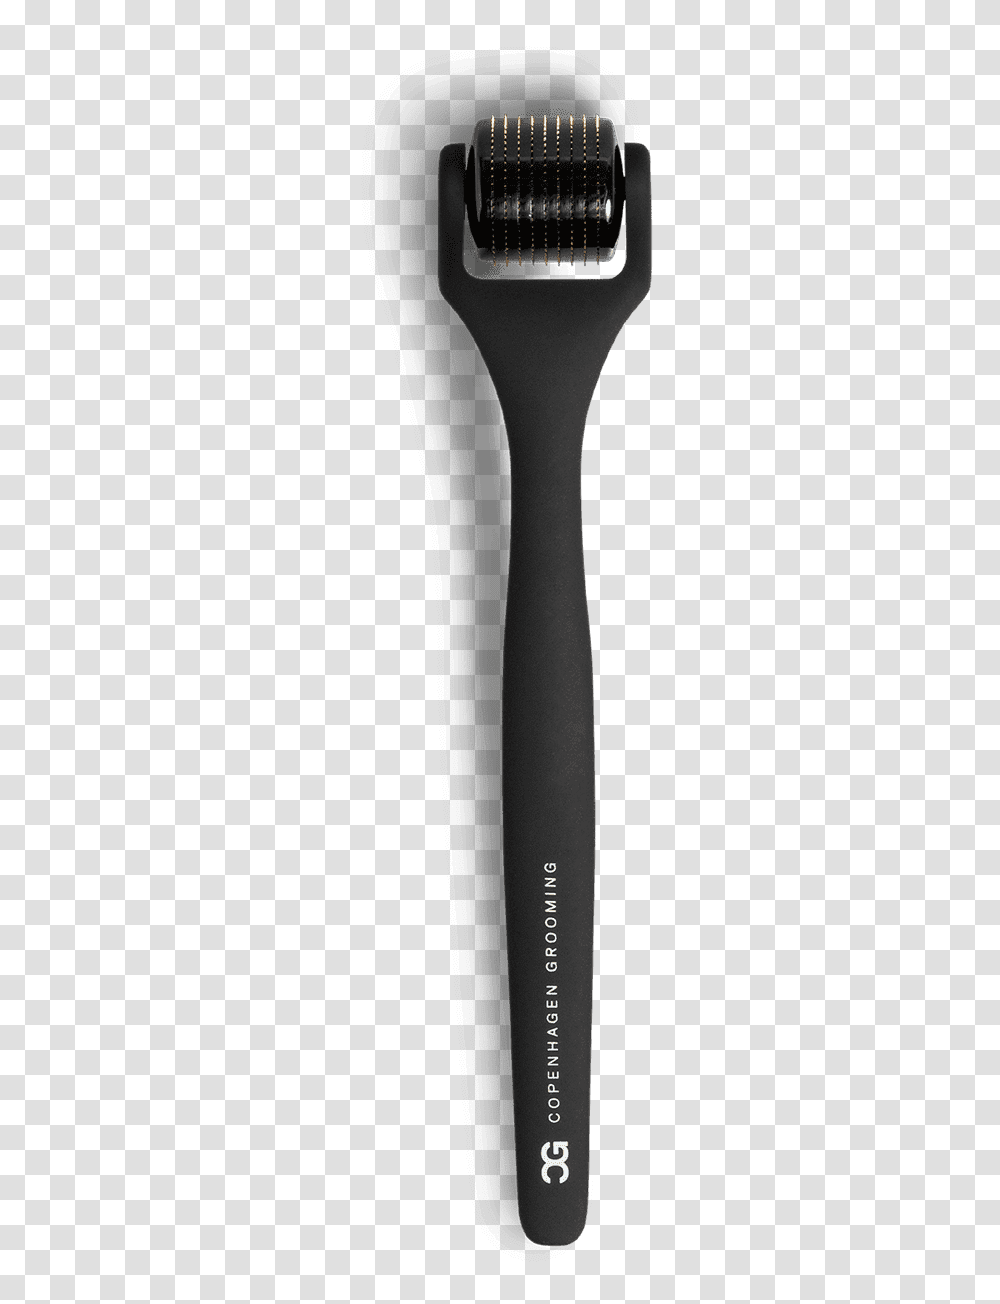 The Beard Roller Pincis Quem Disse Berenice, Cutlery, Tie, Accessories, Spoon Transparent Png